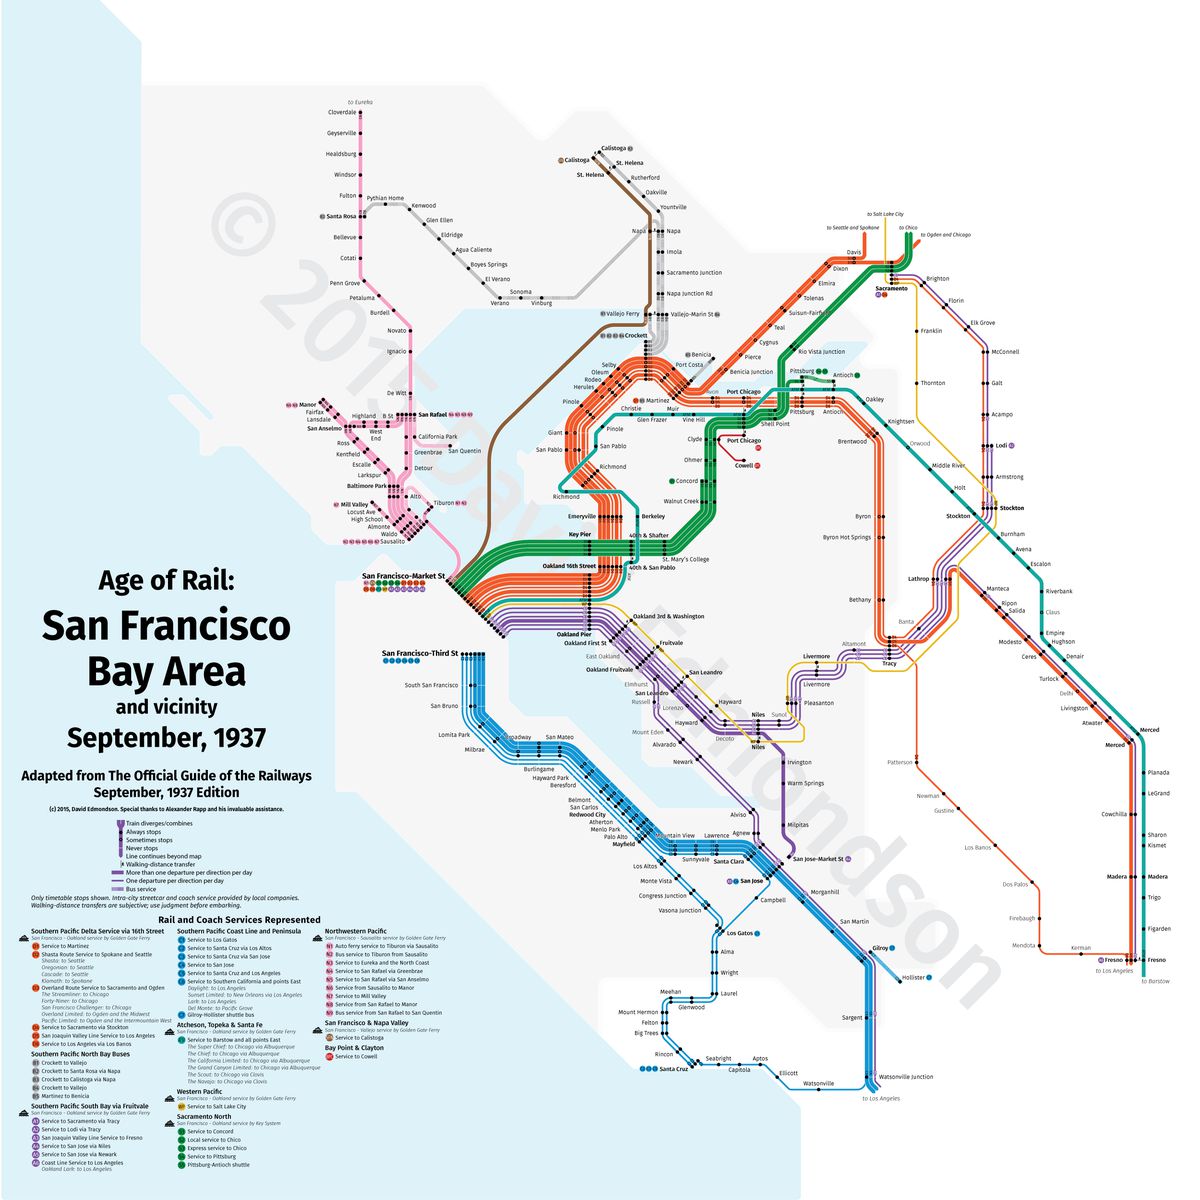 BART-style old trains of SF map.